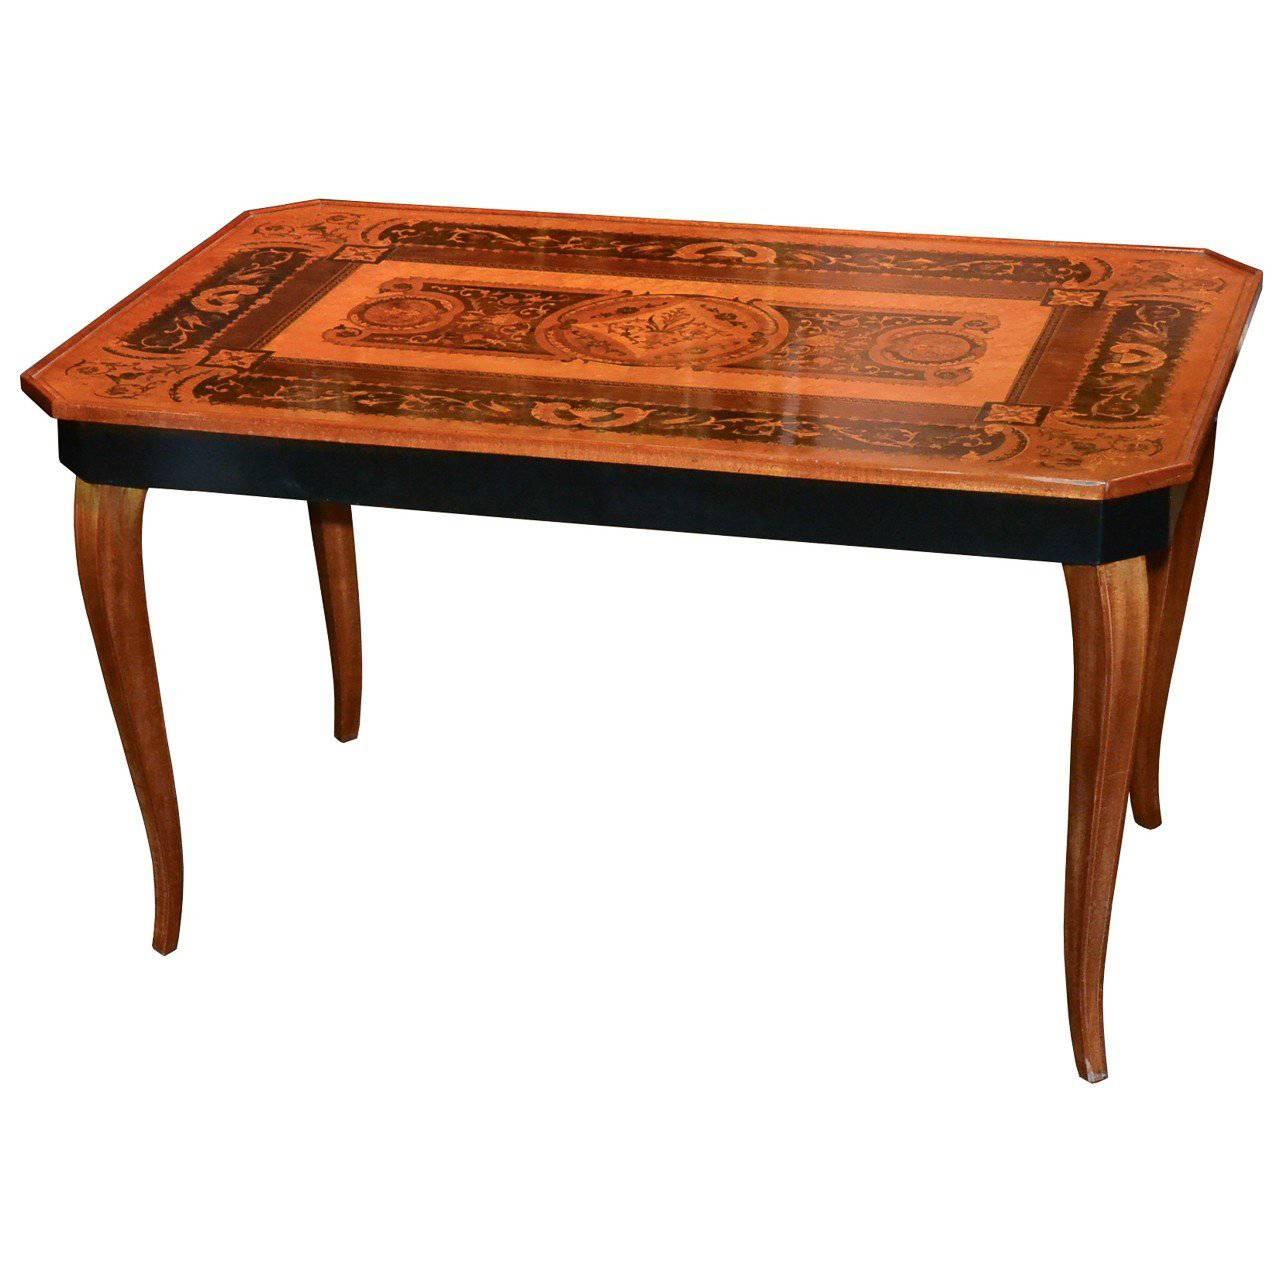 Antique Italian Marquetry Inlaid Coffee Table